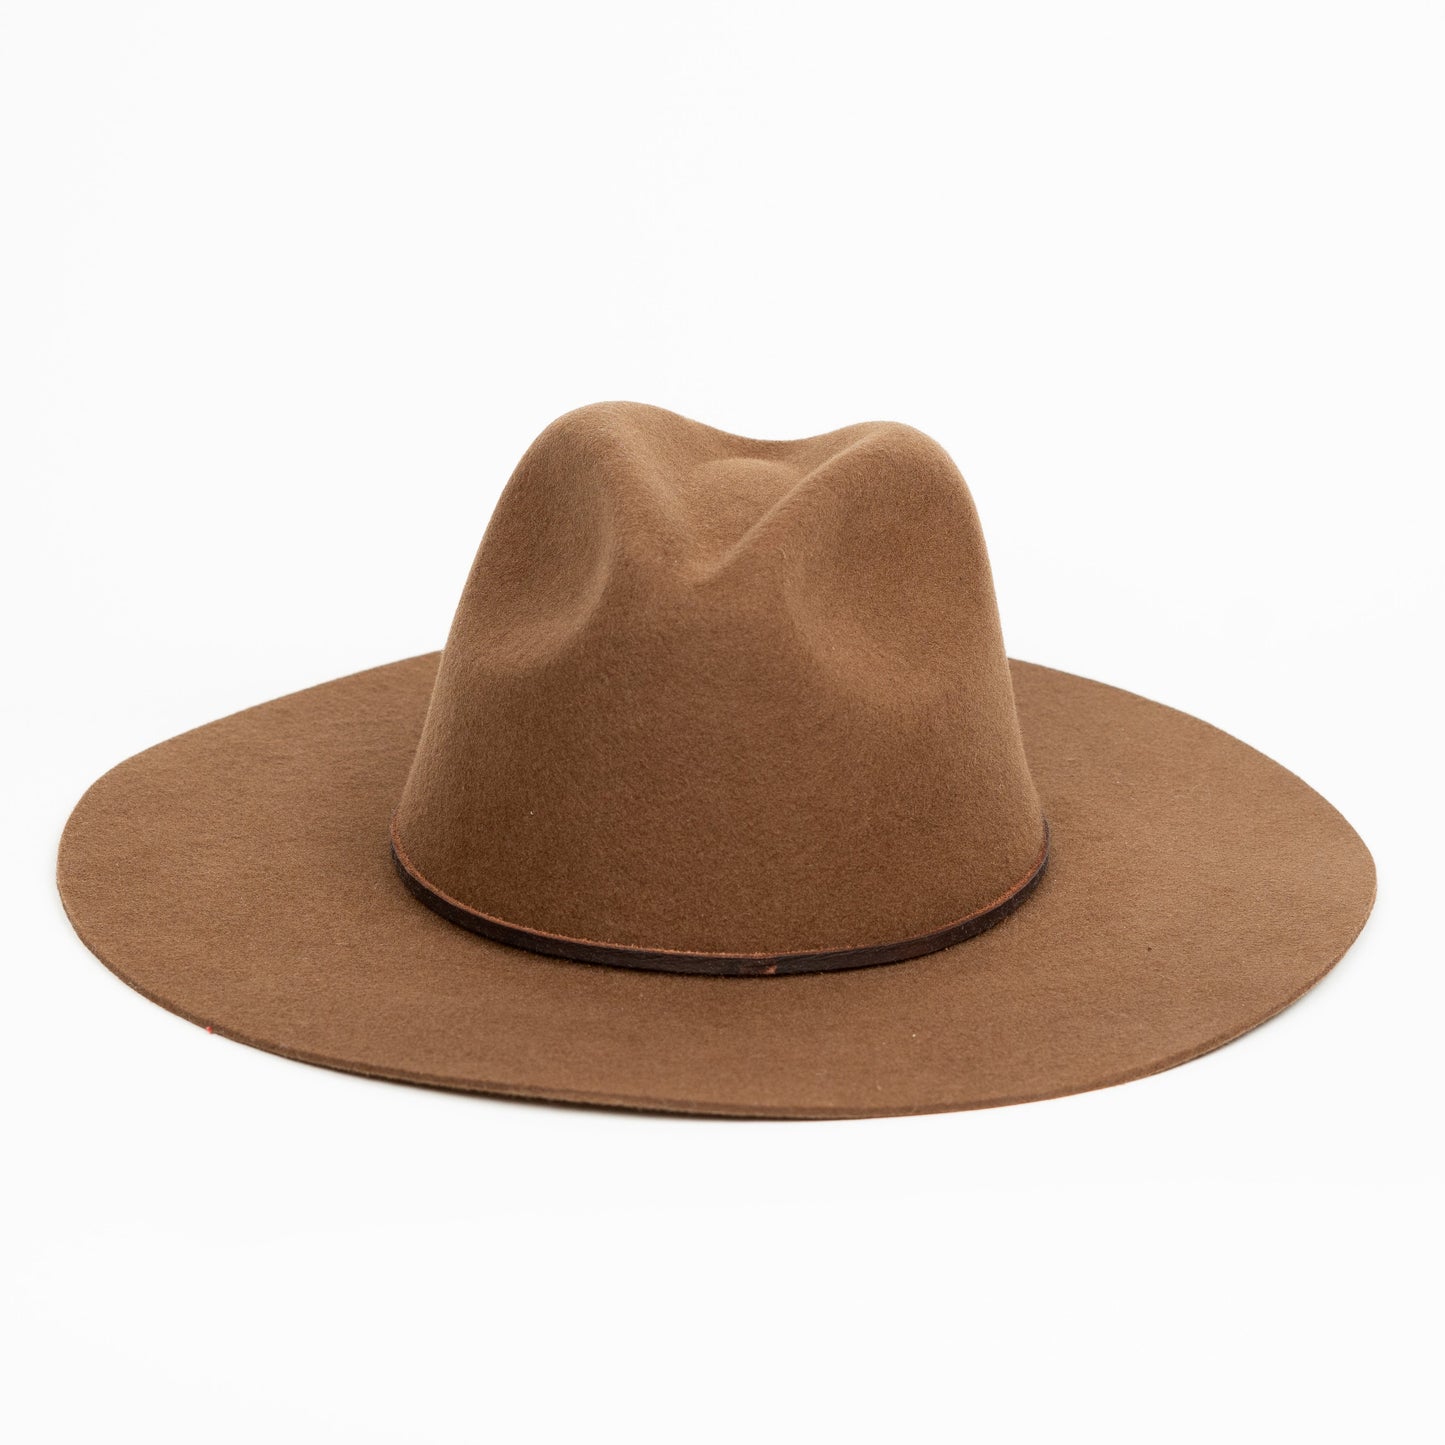 The Dre Western Rancher Hat - Oak by Made by Minga